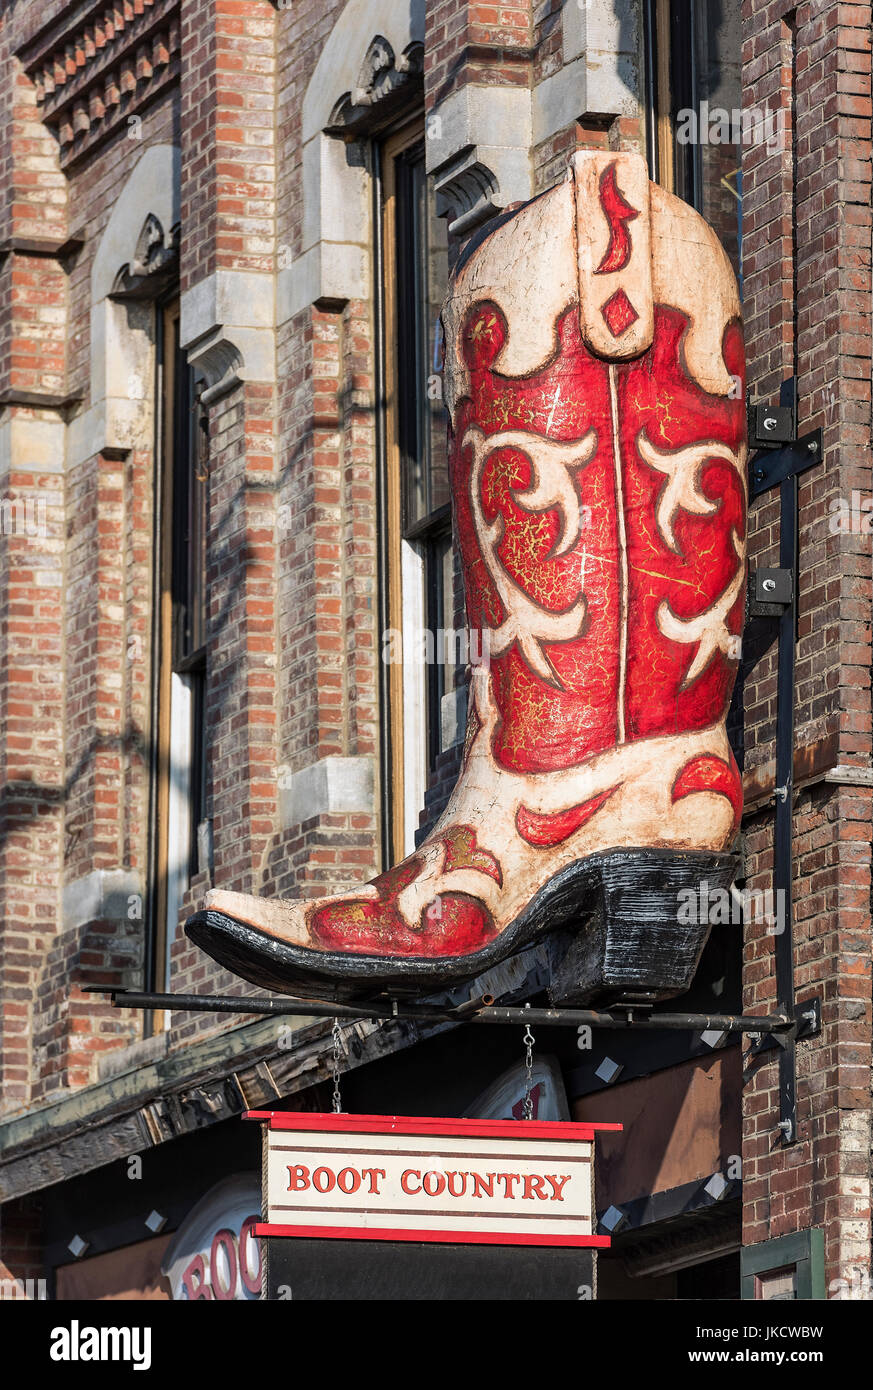 Cowboy boot store on Broadway, Nashville, Tennessee, USA. Stock Photo